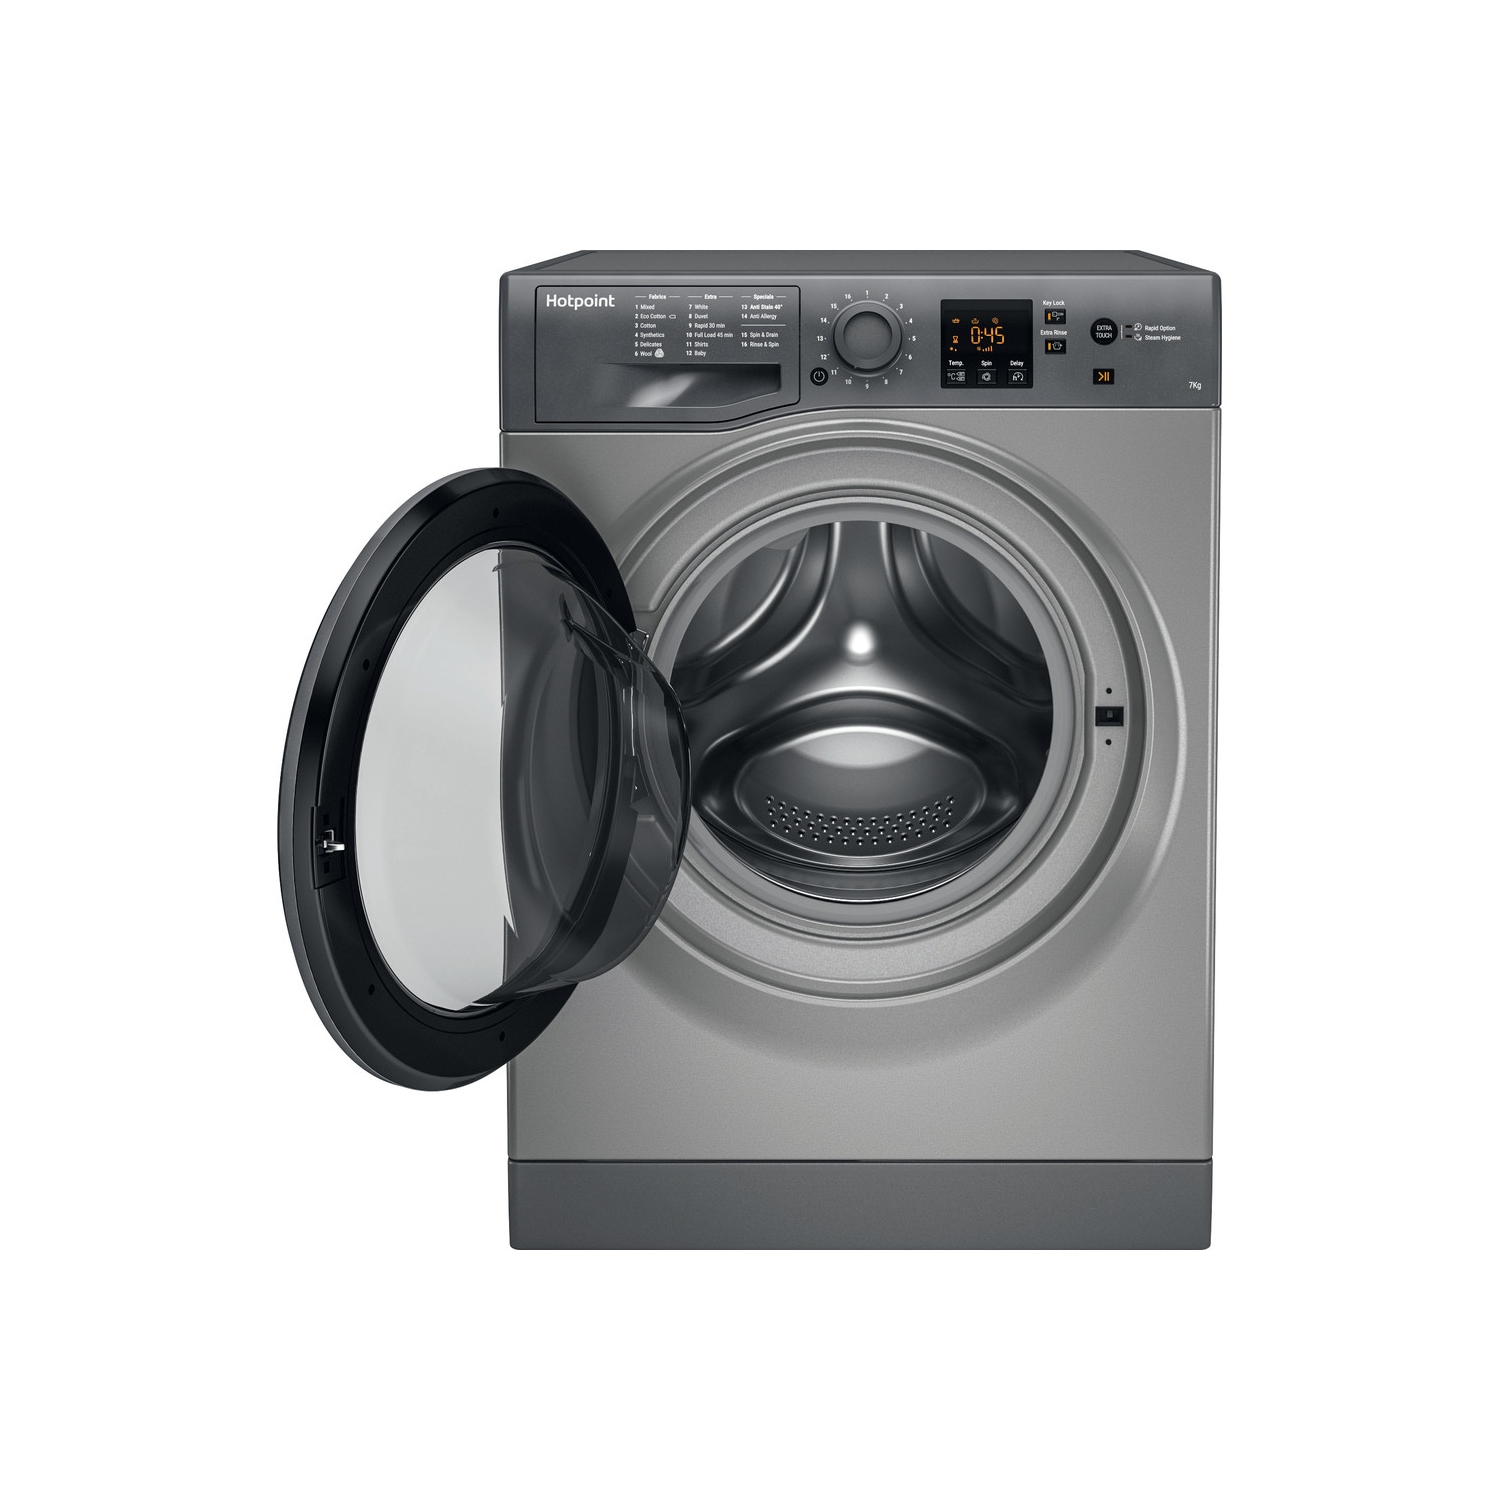 Hotpoint WMAOD743G A++ Rated Freestanding Washing Machine Graphite 